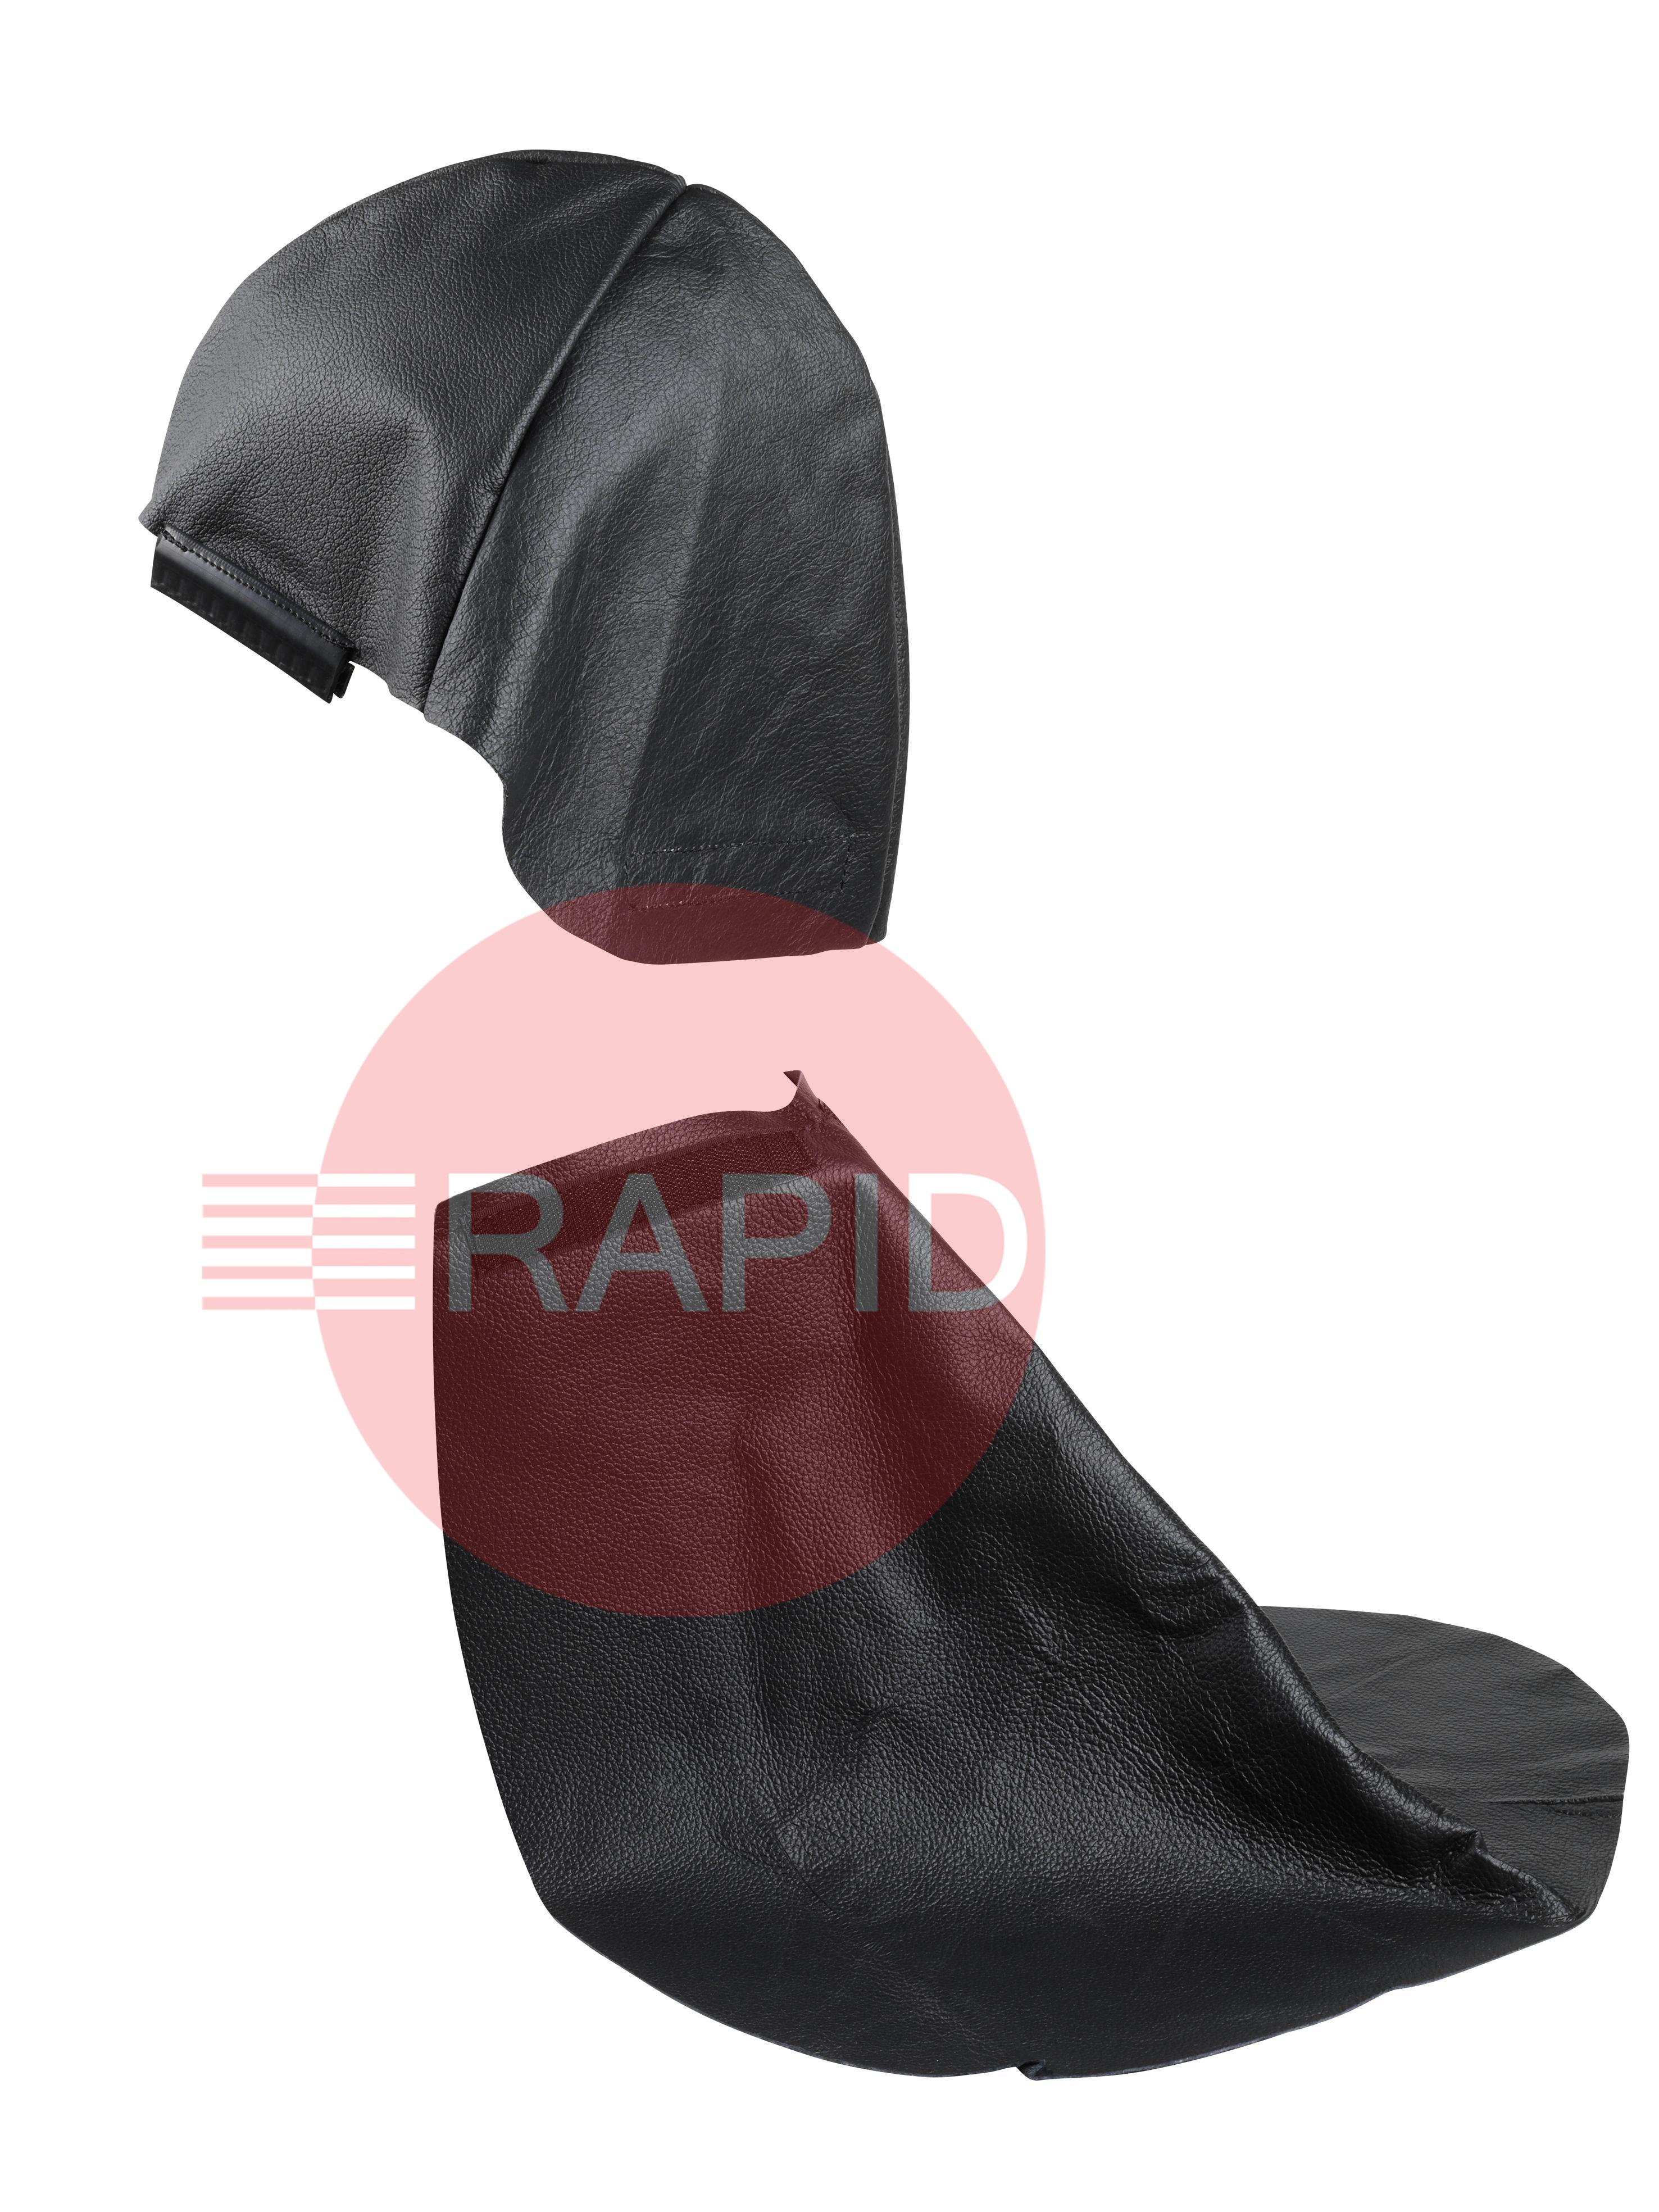 4028.031  Optrel Leather Head & Neck Protection for PAPR Welding Helmets (E3000/E1100)